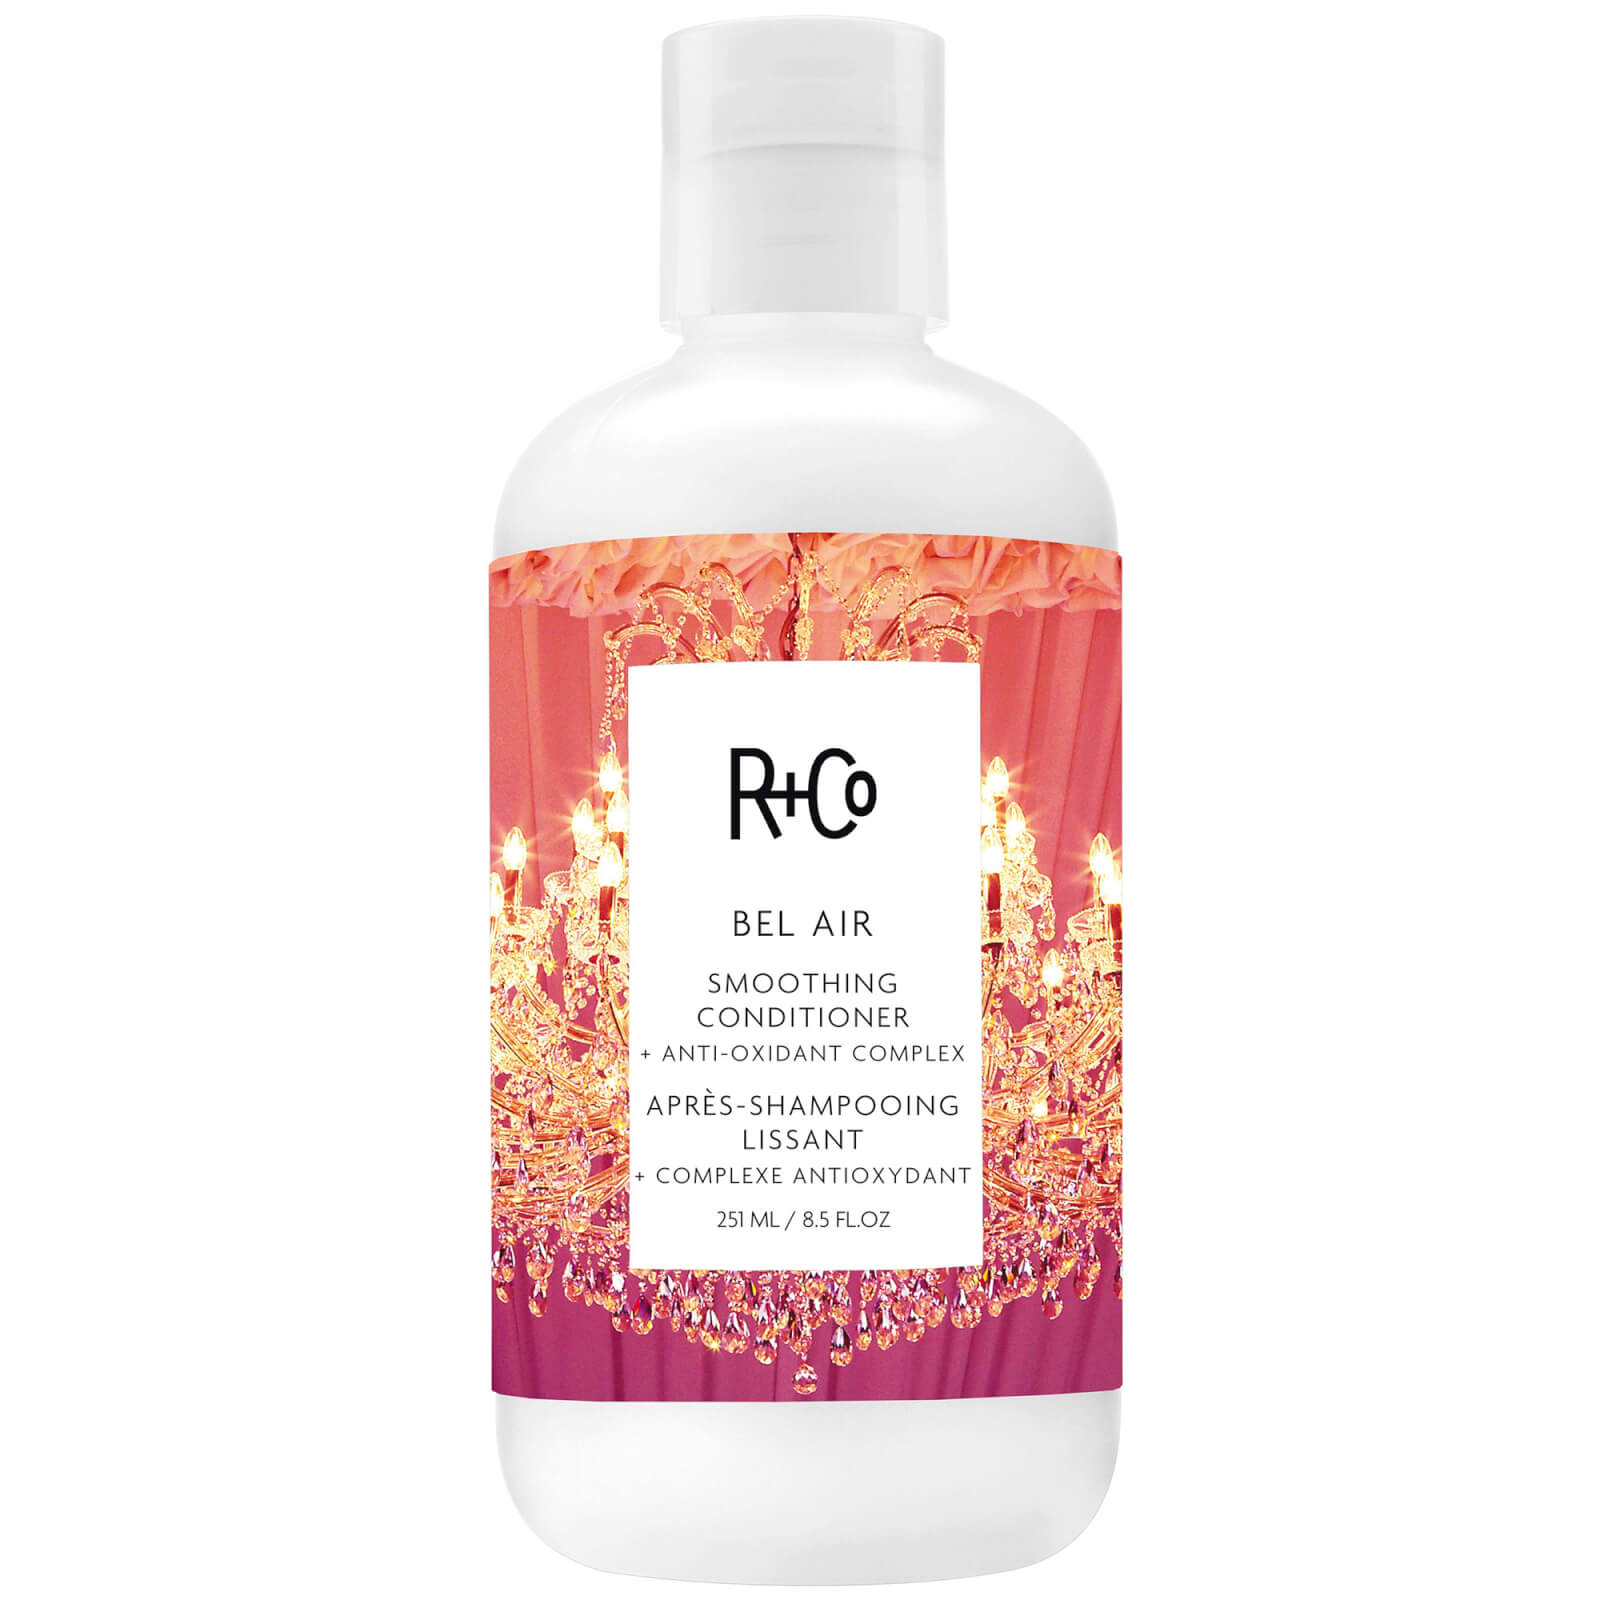 R + Co Bel Air Smoothing Conditioner Anti-oxidant Complex 8.5 Fl. oz